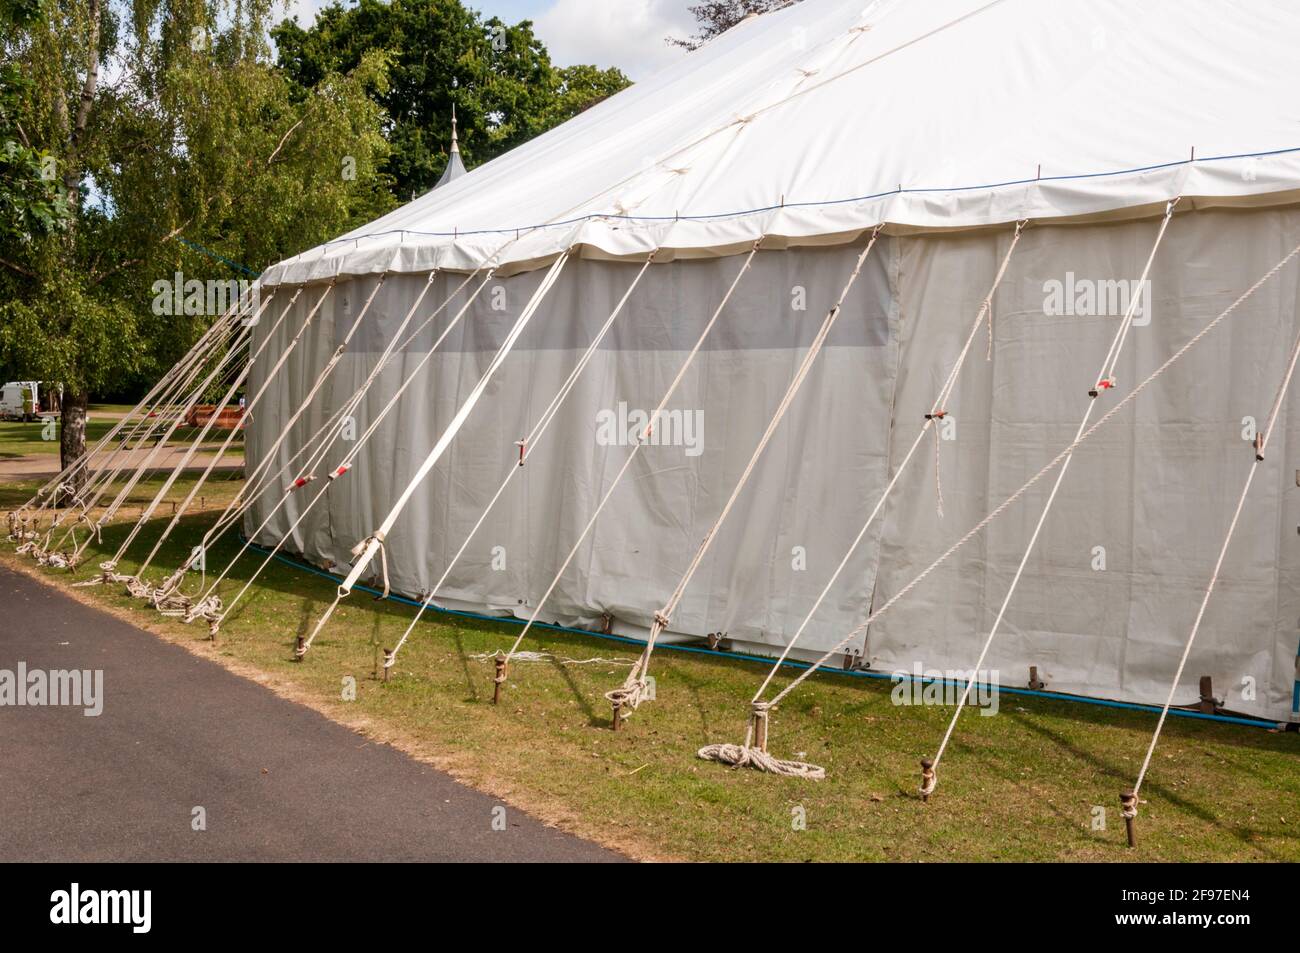 Guy ropes holding up a large tent or marquee erected in a park. Stock Photo